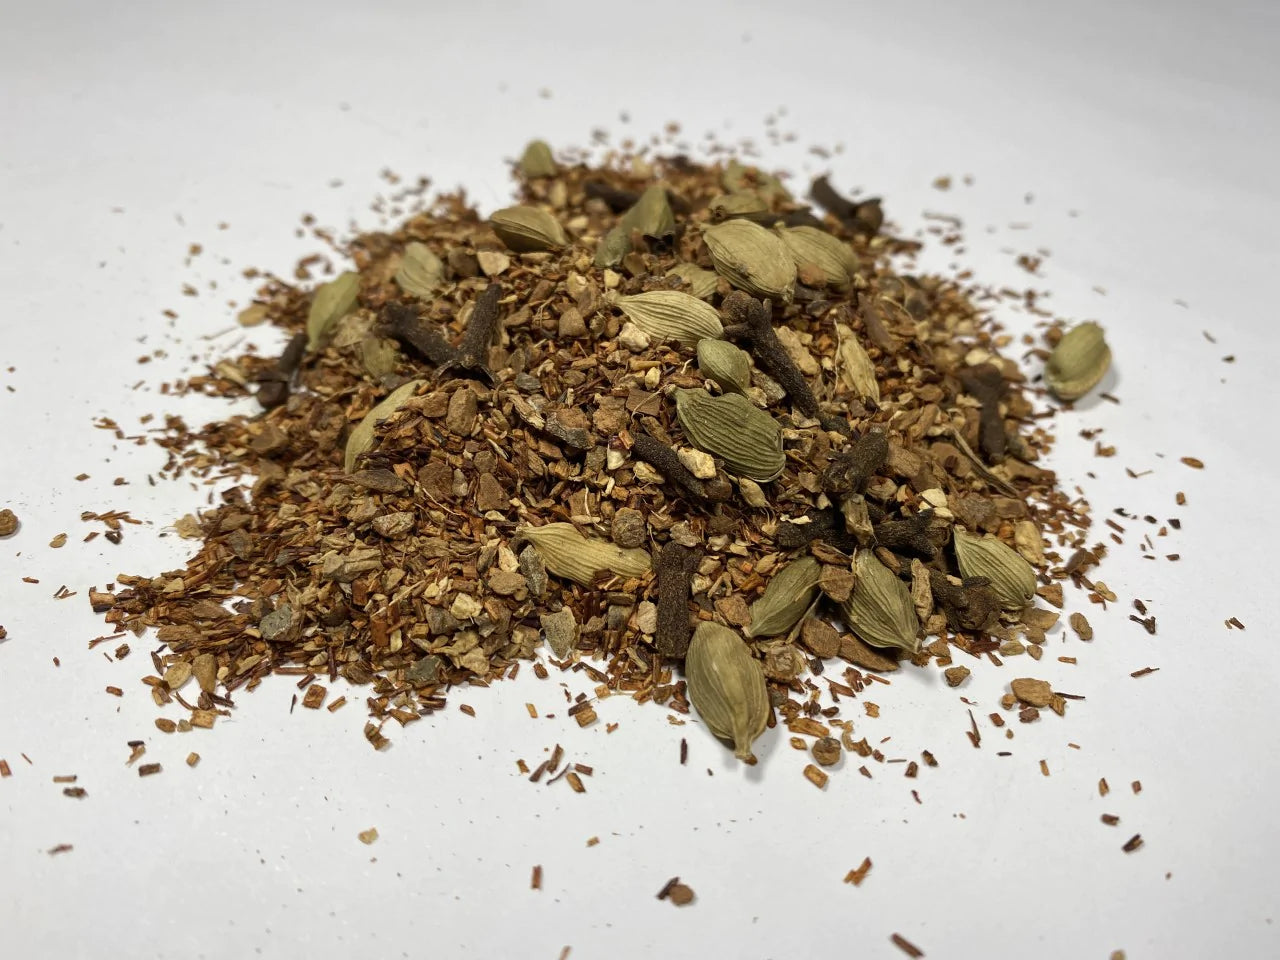 Red Chai Spice - Spicy Ruby Rooibos